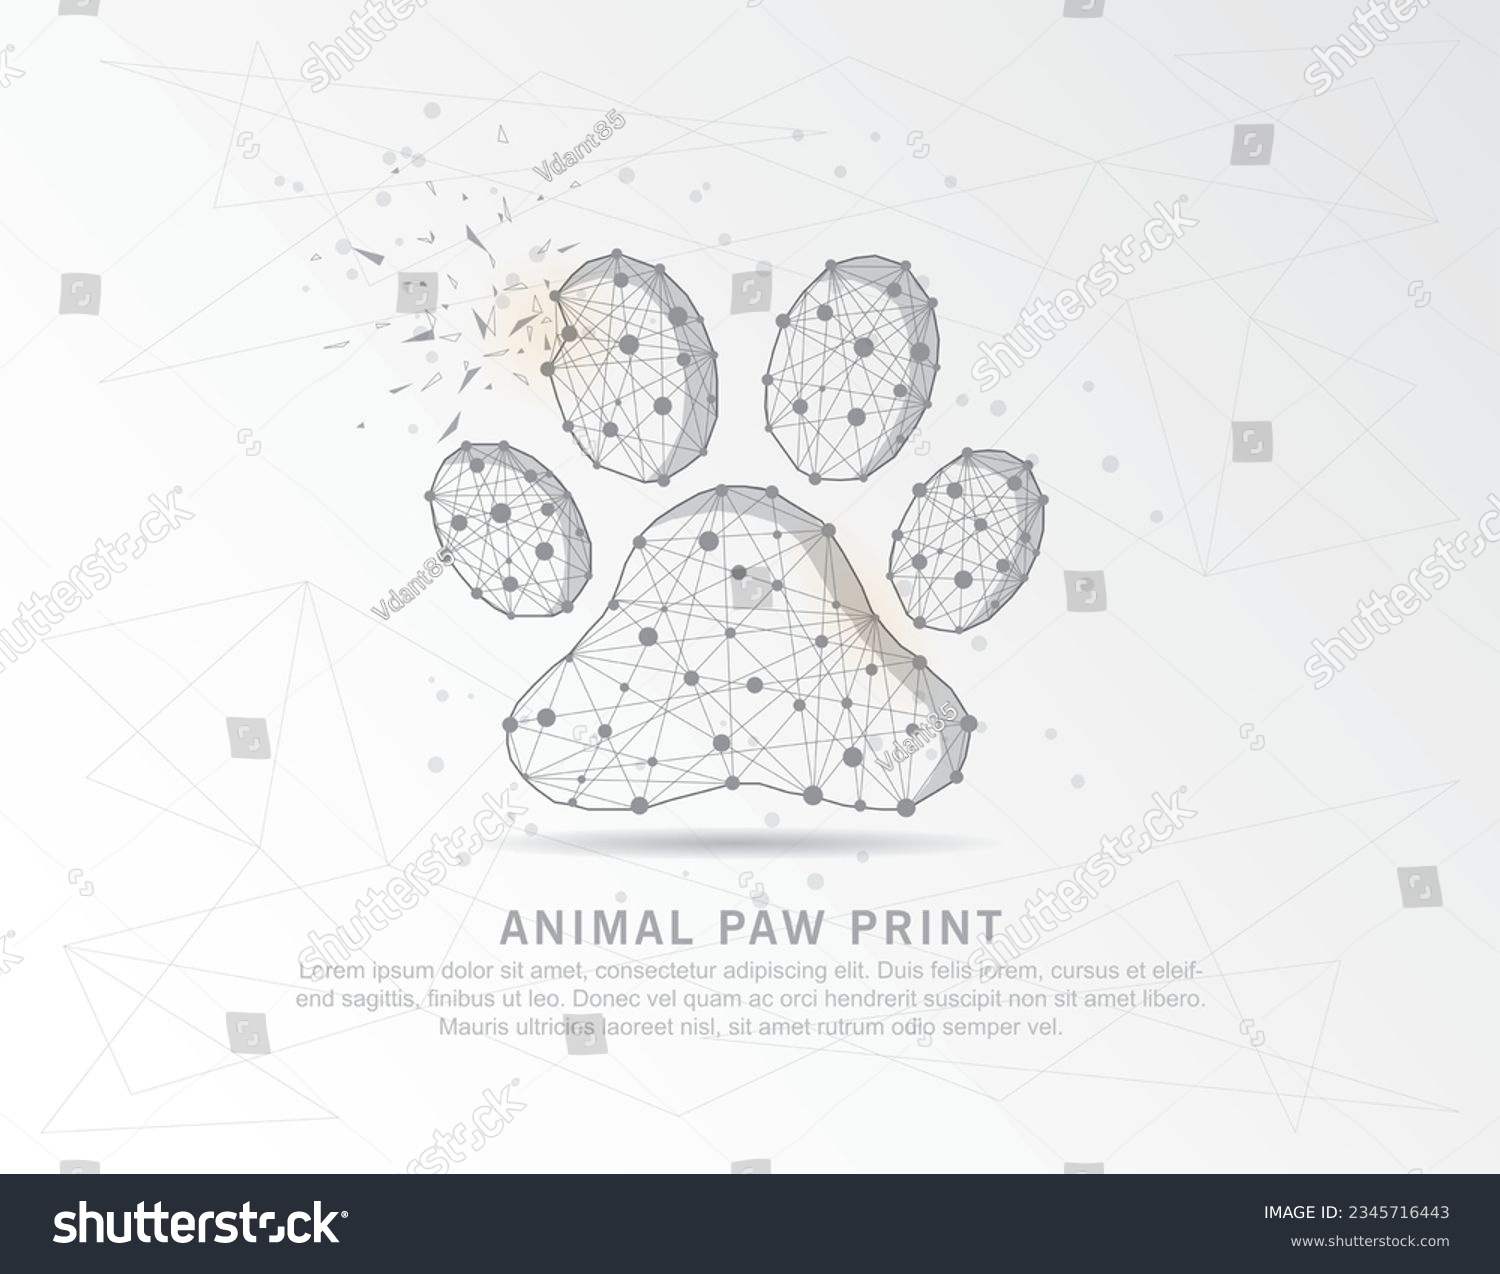 SVG of Animal paw print, abstract mash line and composition digitally drawn in the form of broken a part triangle shape and scattered dots low poly wire frame. svg